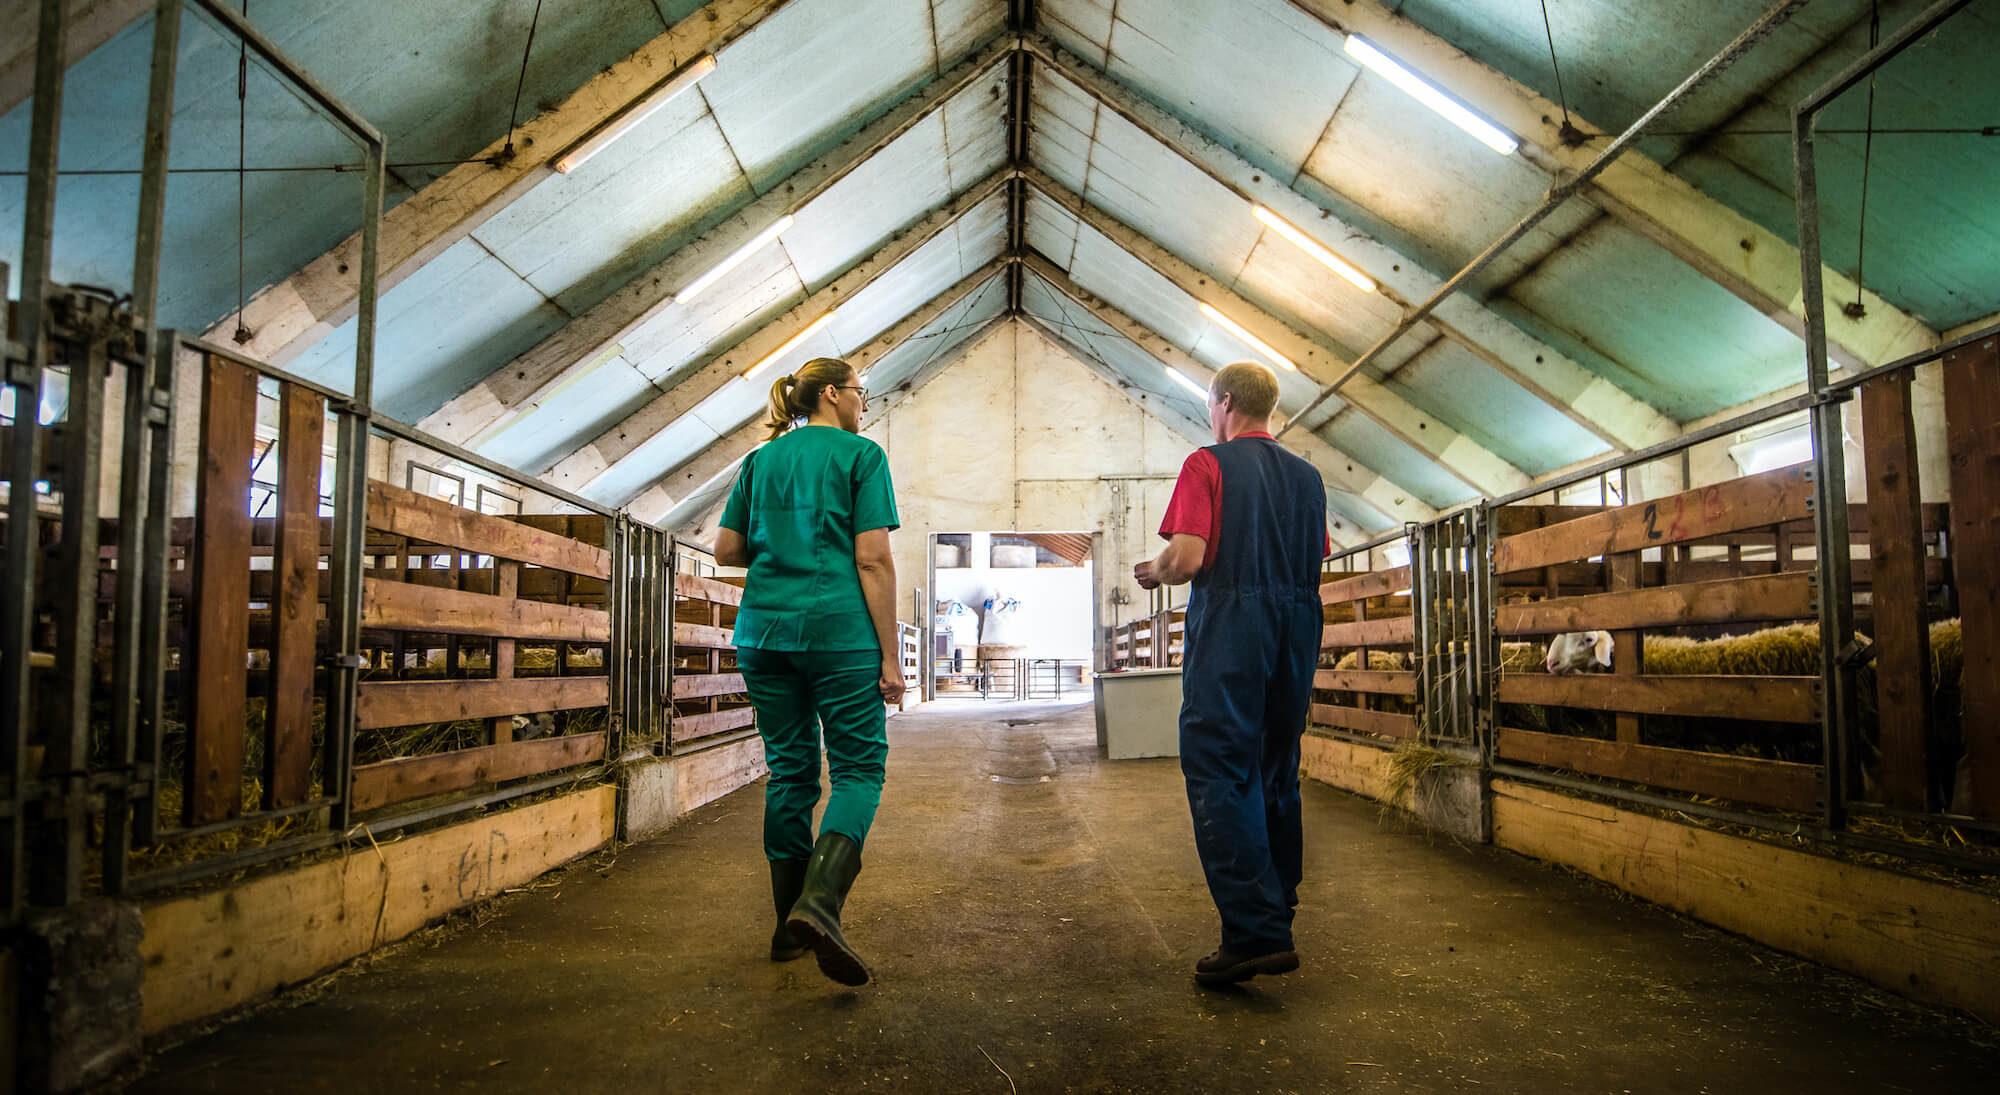 Male and female veterinarians talking with each other while walking in barn. August 2021